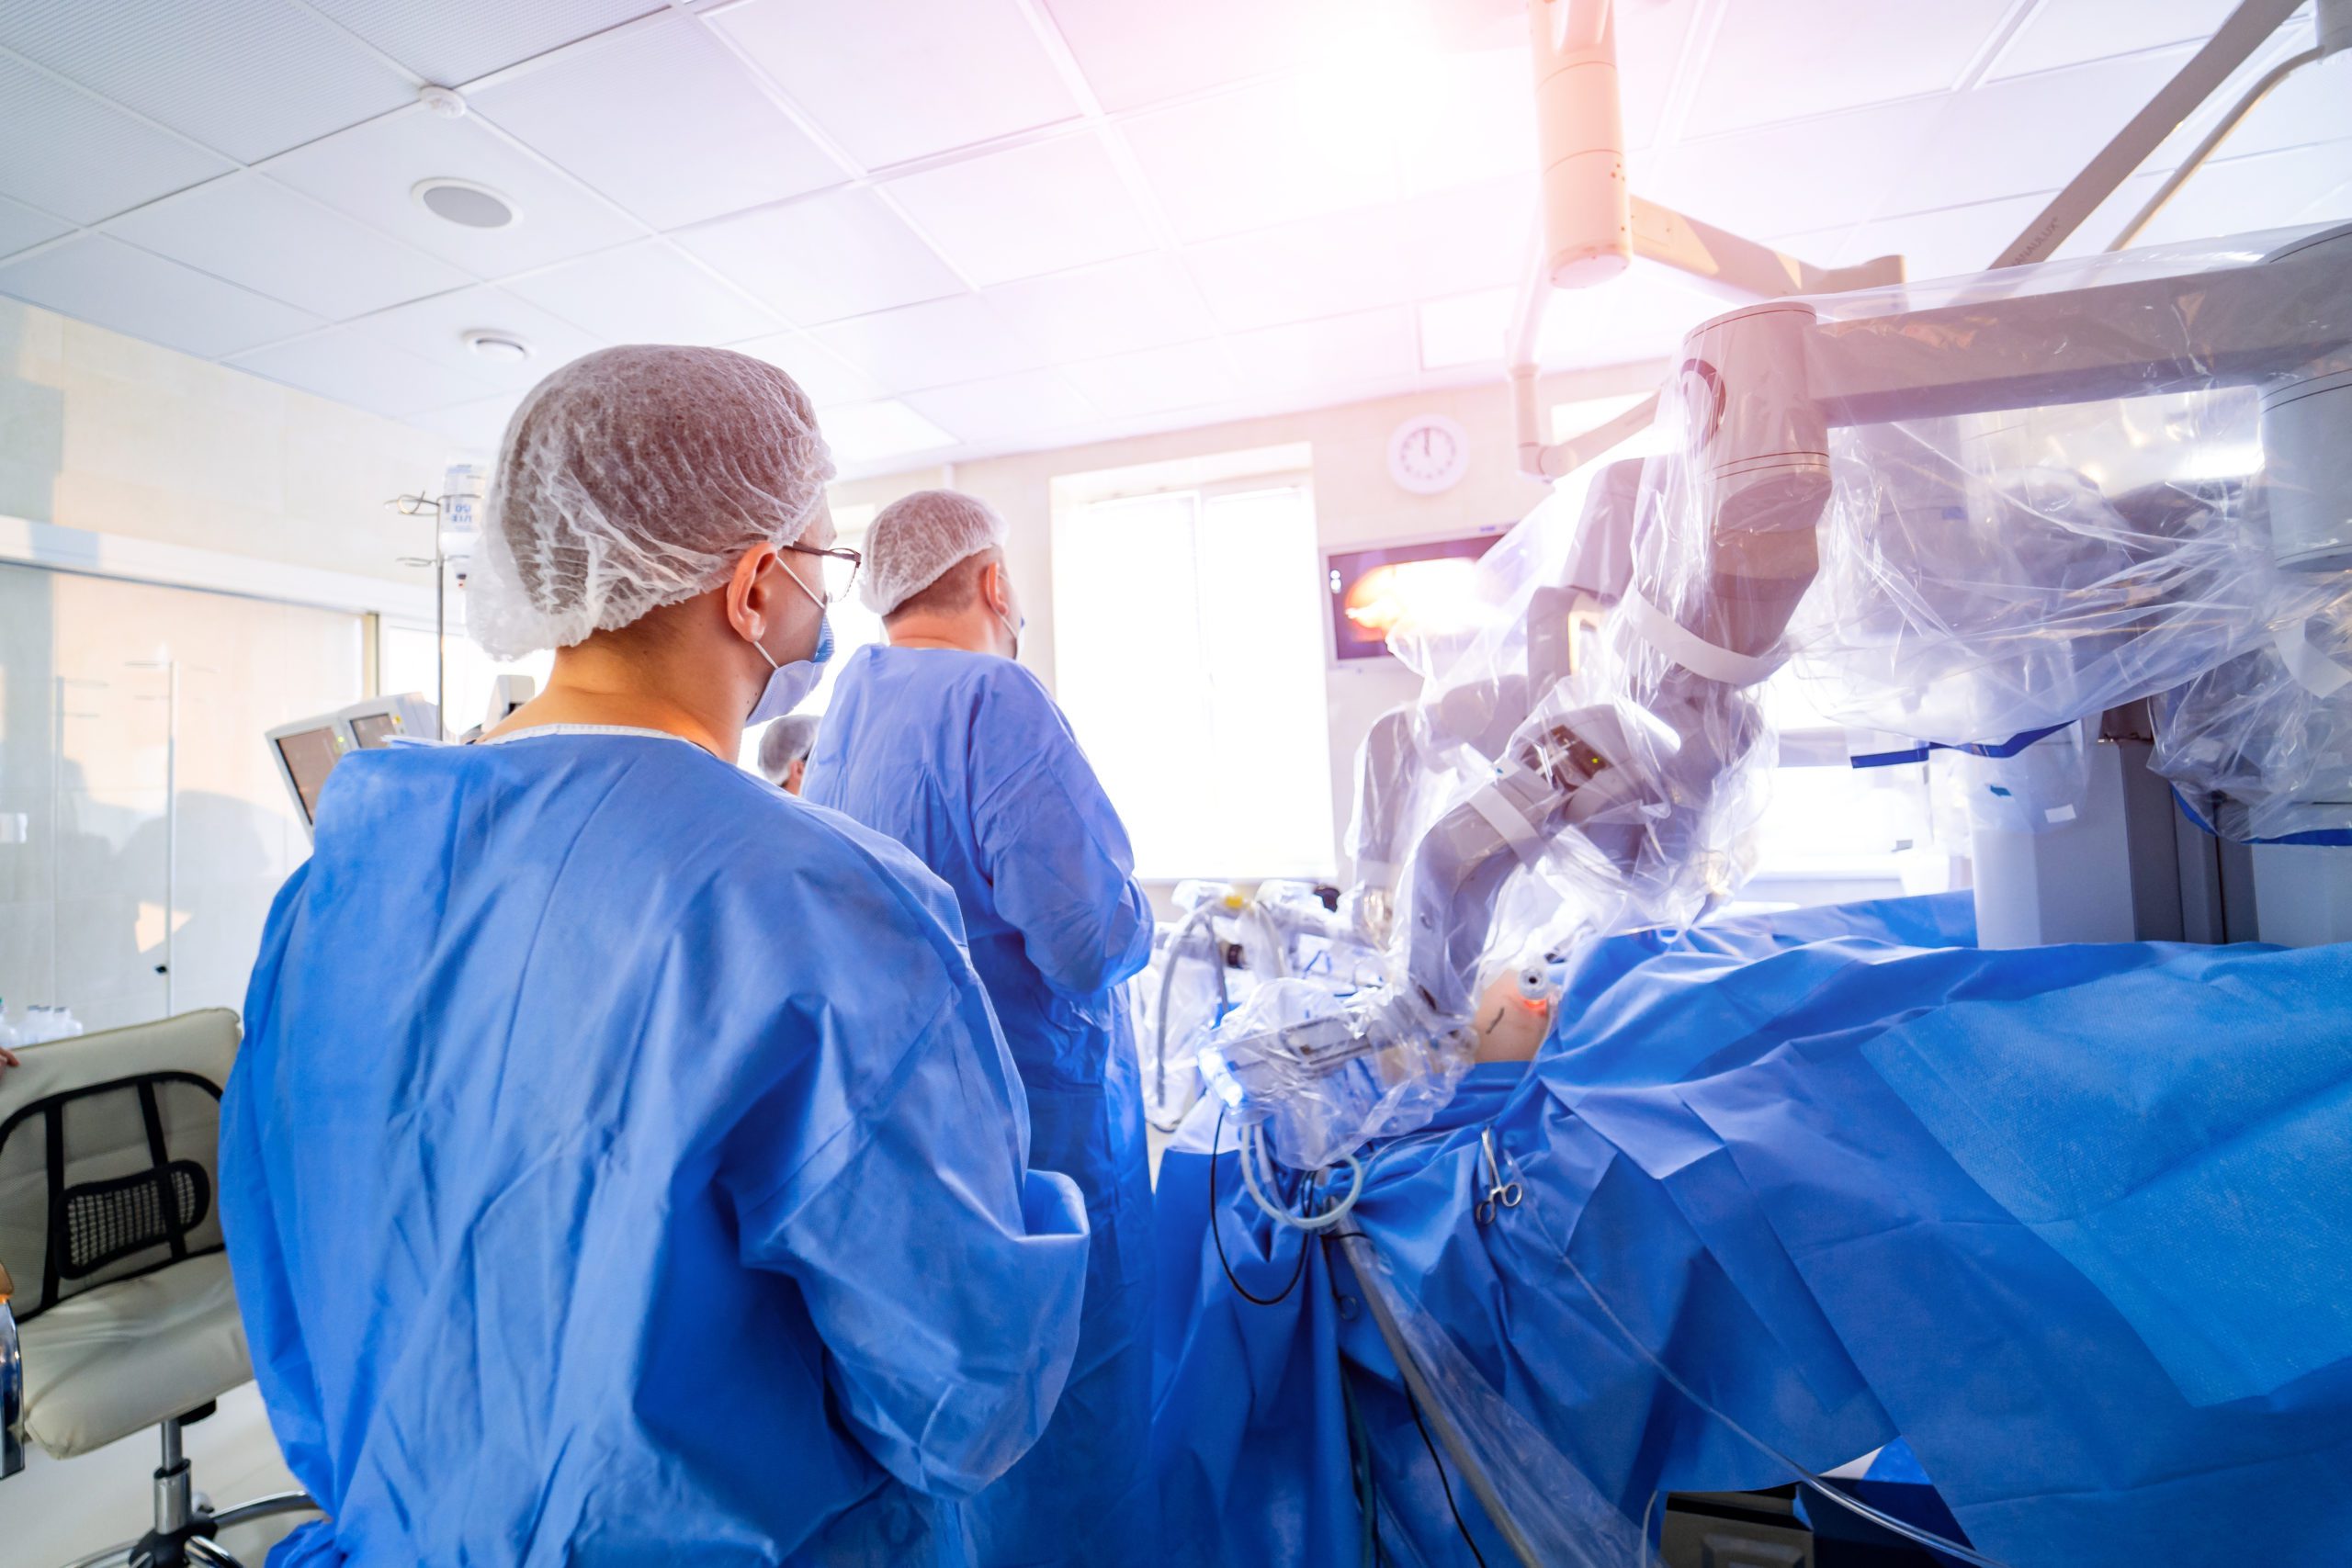 Robotics in healthcare: Robotic surgery and patient care